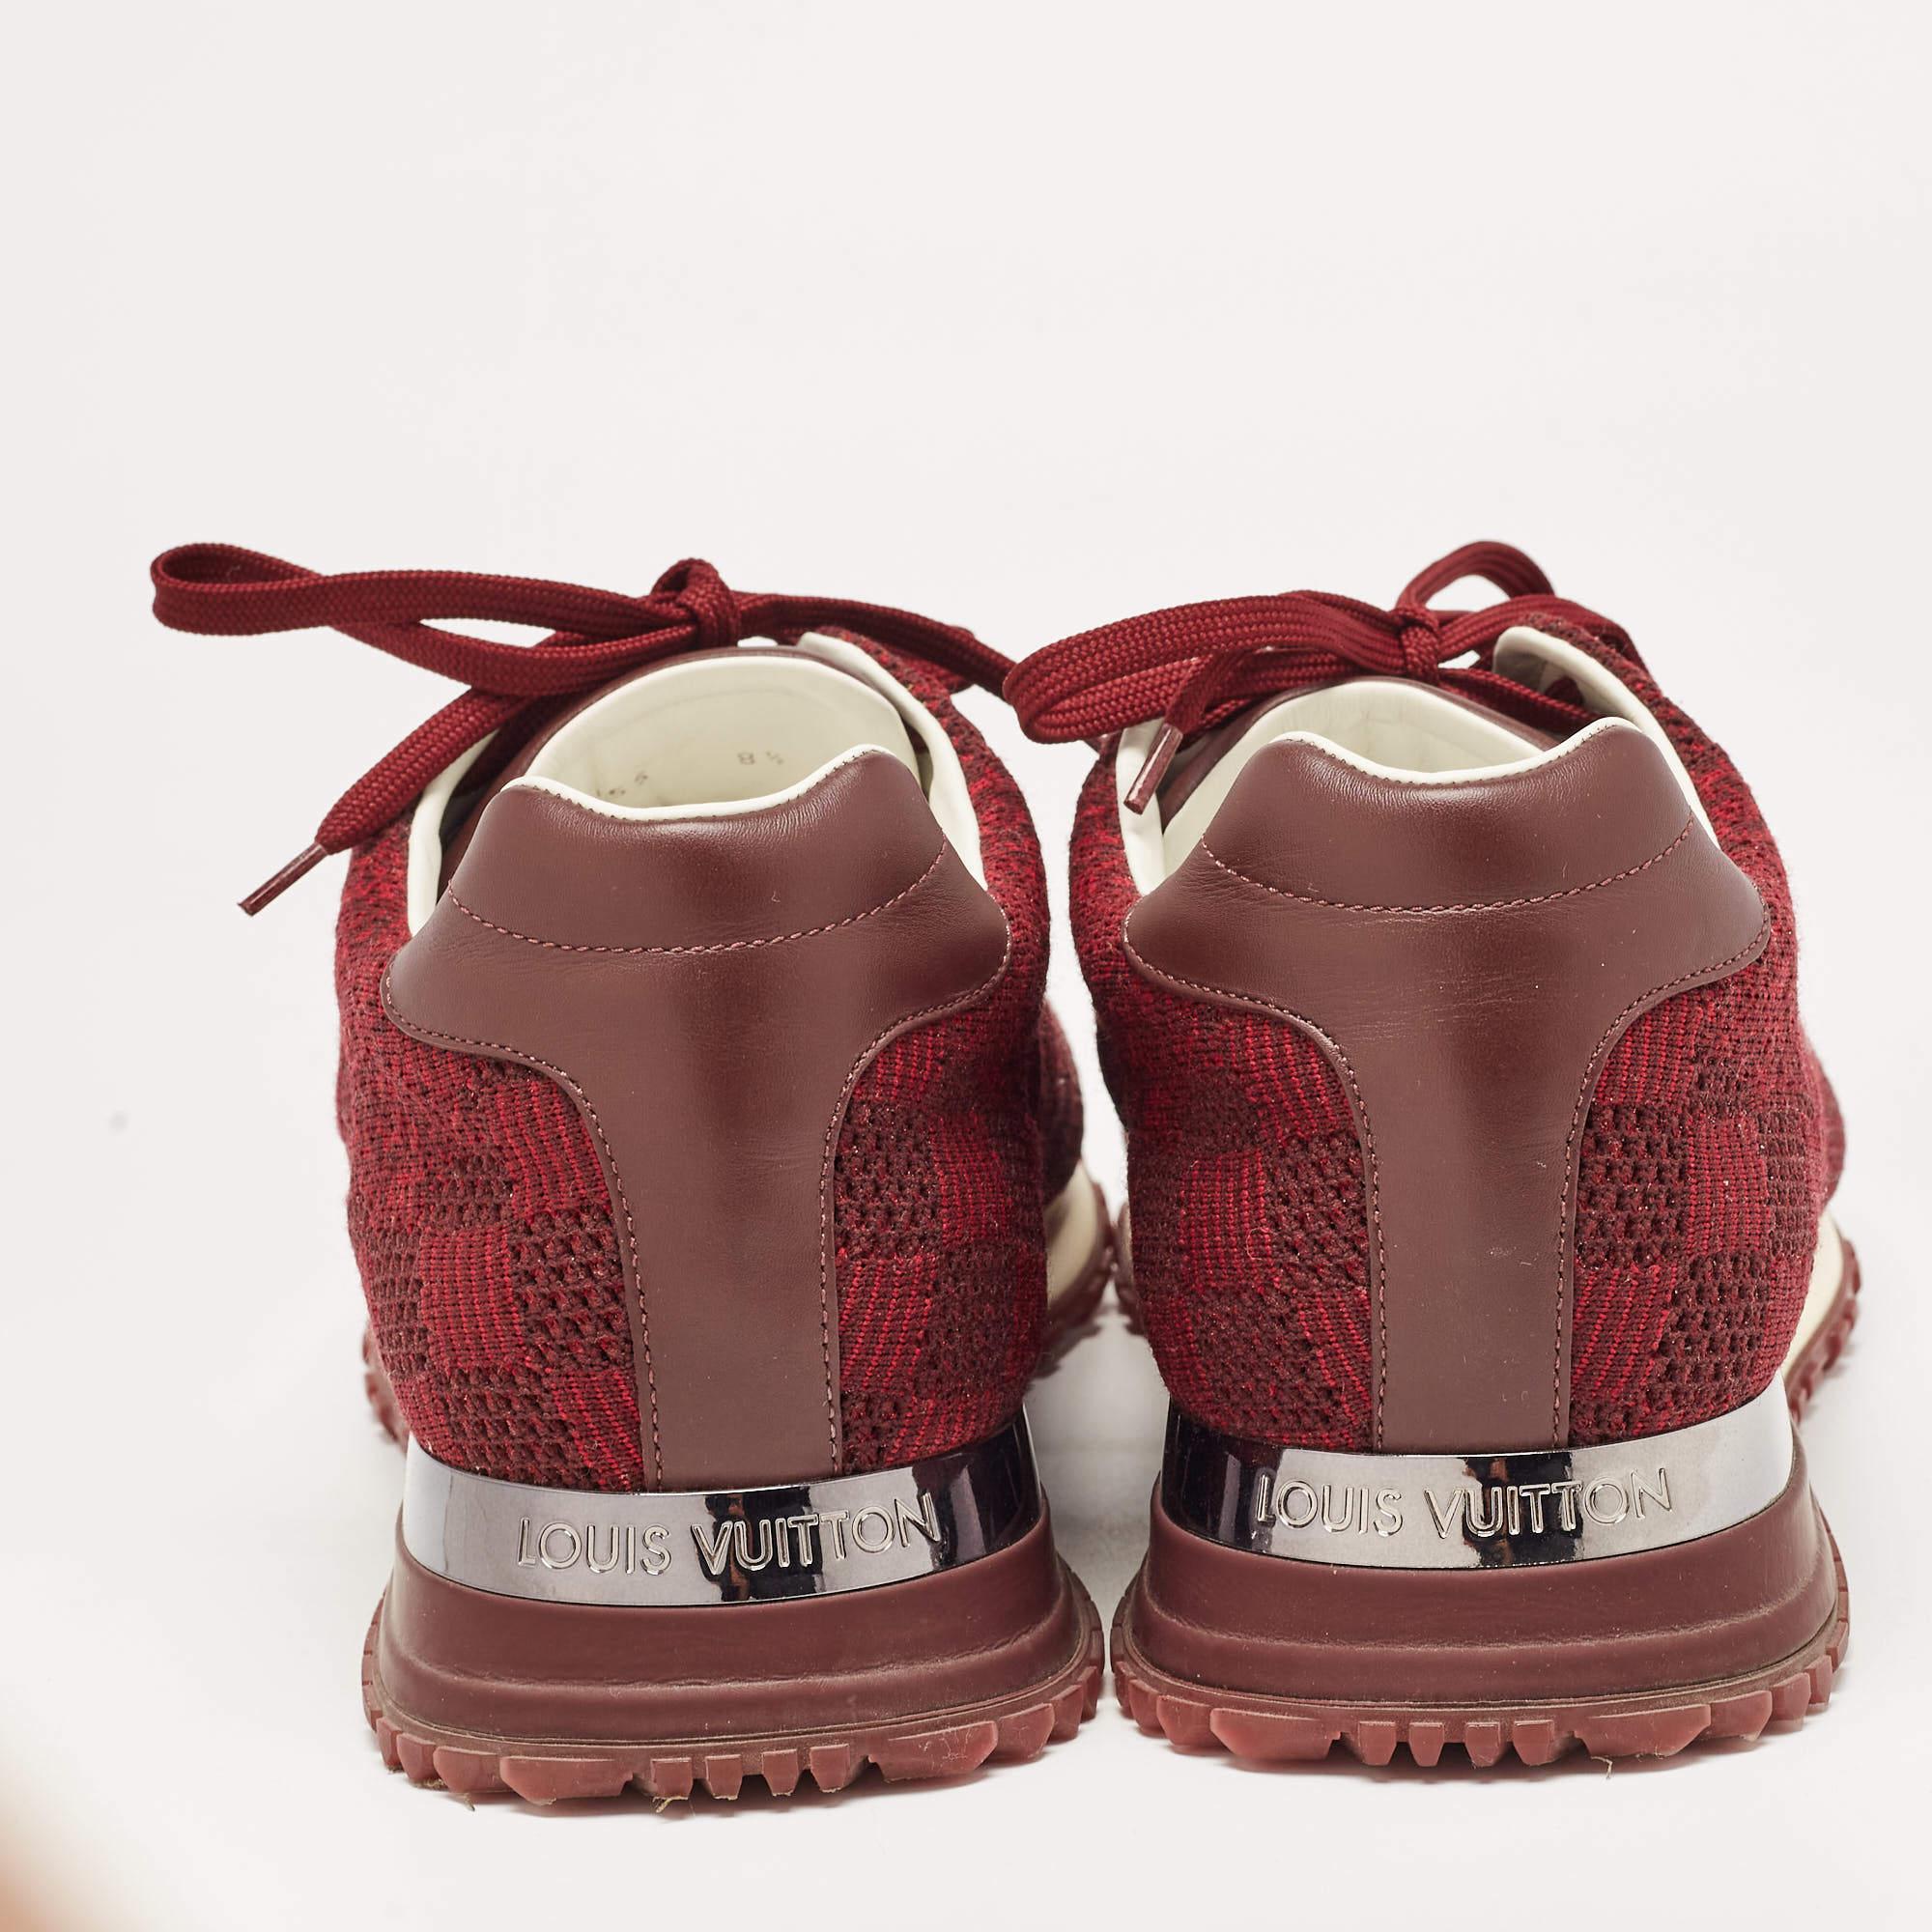 Louis Vuitton Burgundy Knit Fabric and Leather Run Away Sneakers Size 42.5 1